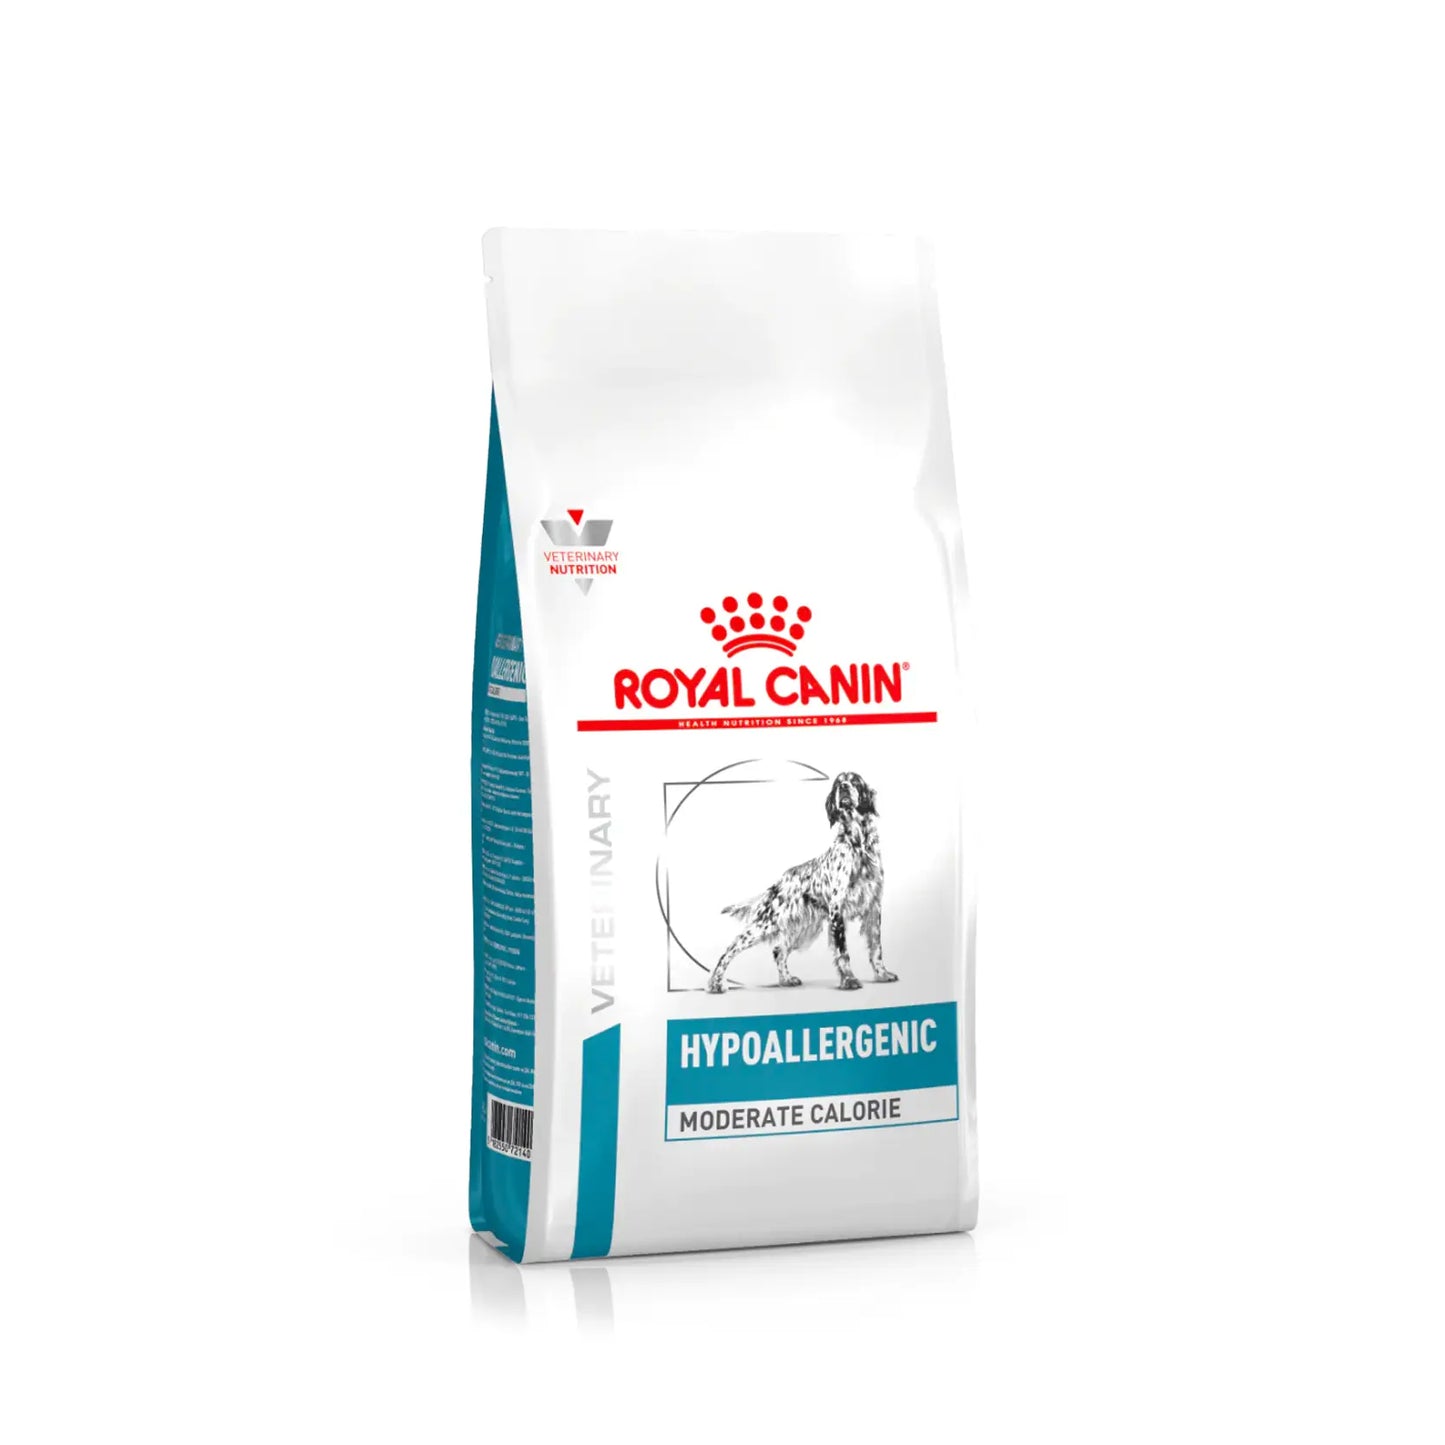 Royal Canin - Canine Hypoallergenic Moderate Calorie